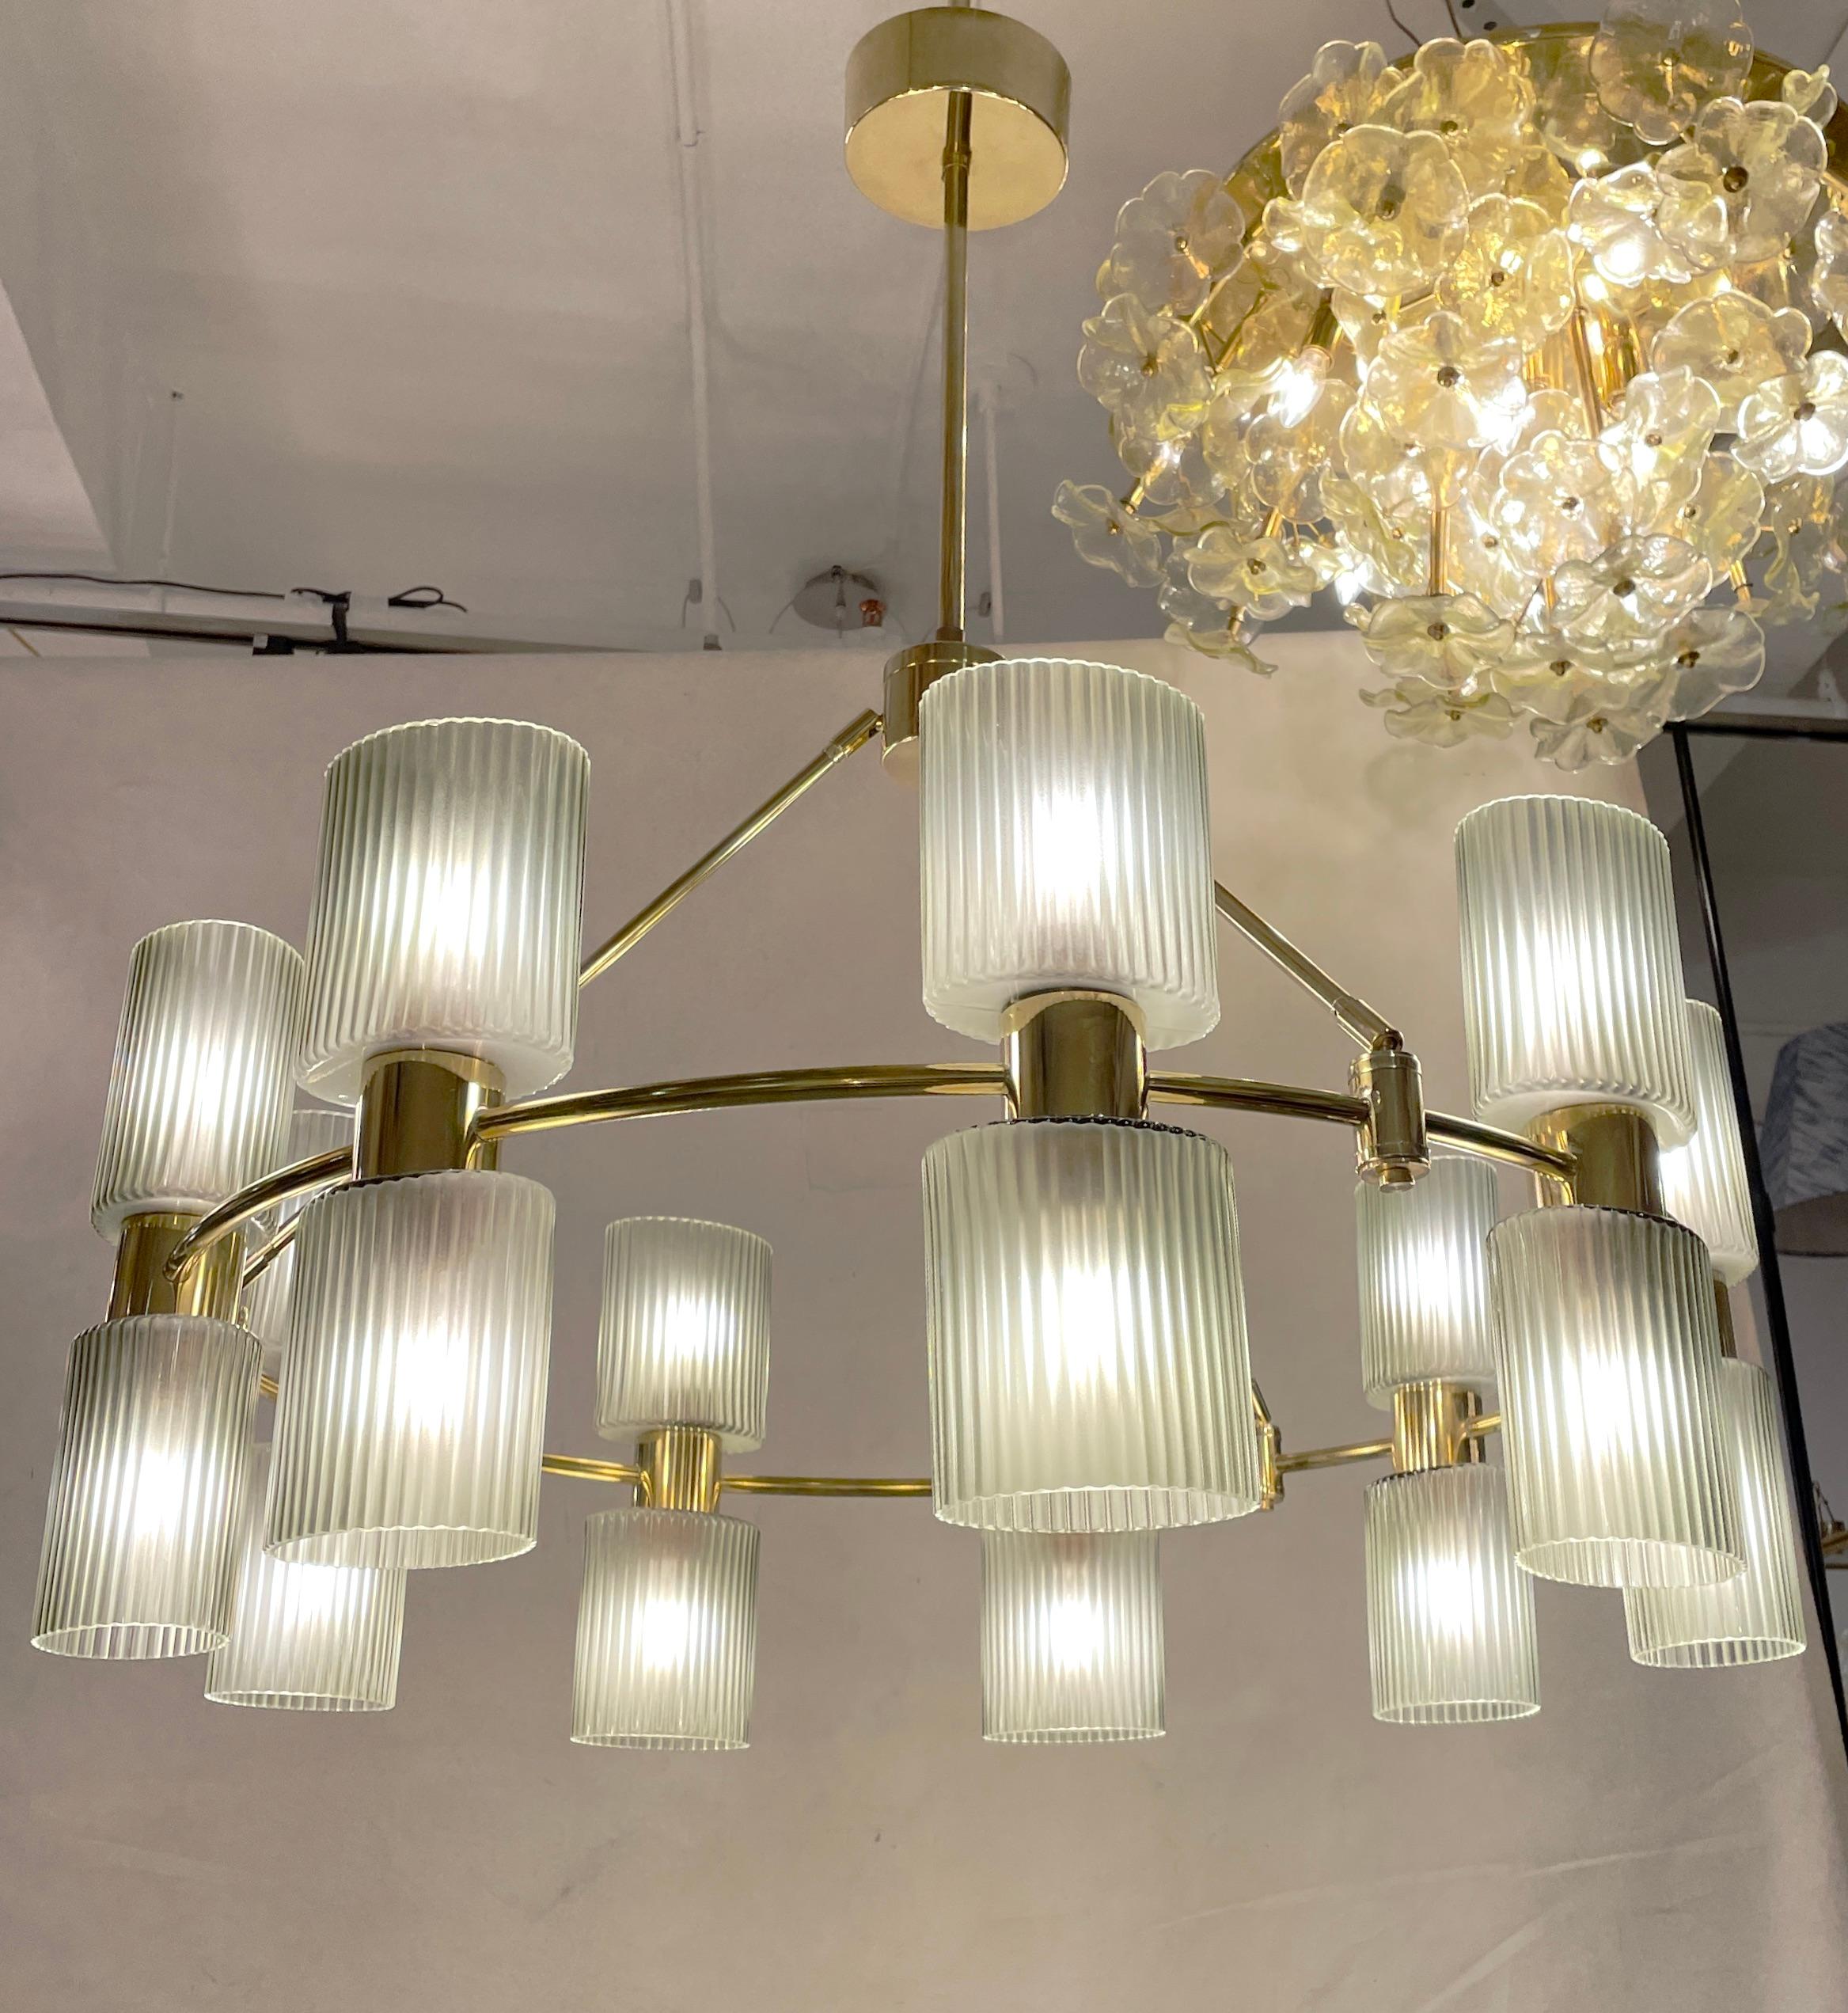 What's old is new again! A sophisticated modern interpretation of the design of a barn farmhouse candle wheel chandelier, this contemporary organic 18-light creation, entirely handcrafted, is customizable in sizes, finishes and glass colors. The